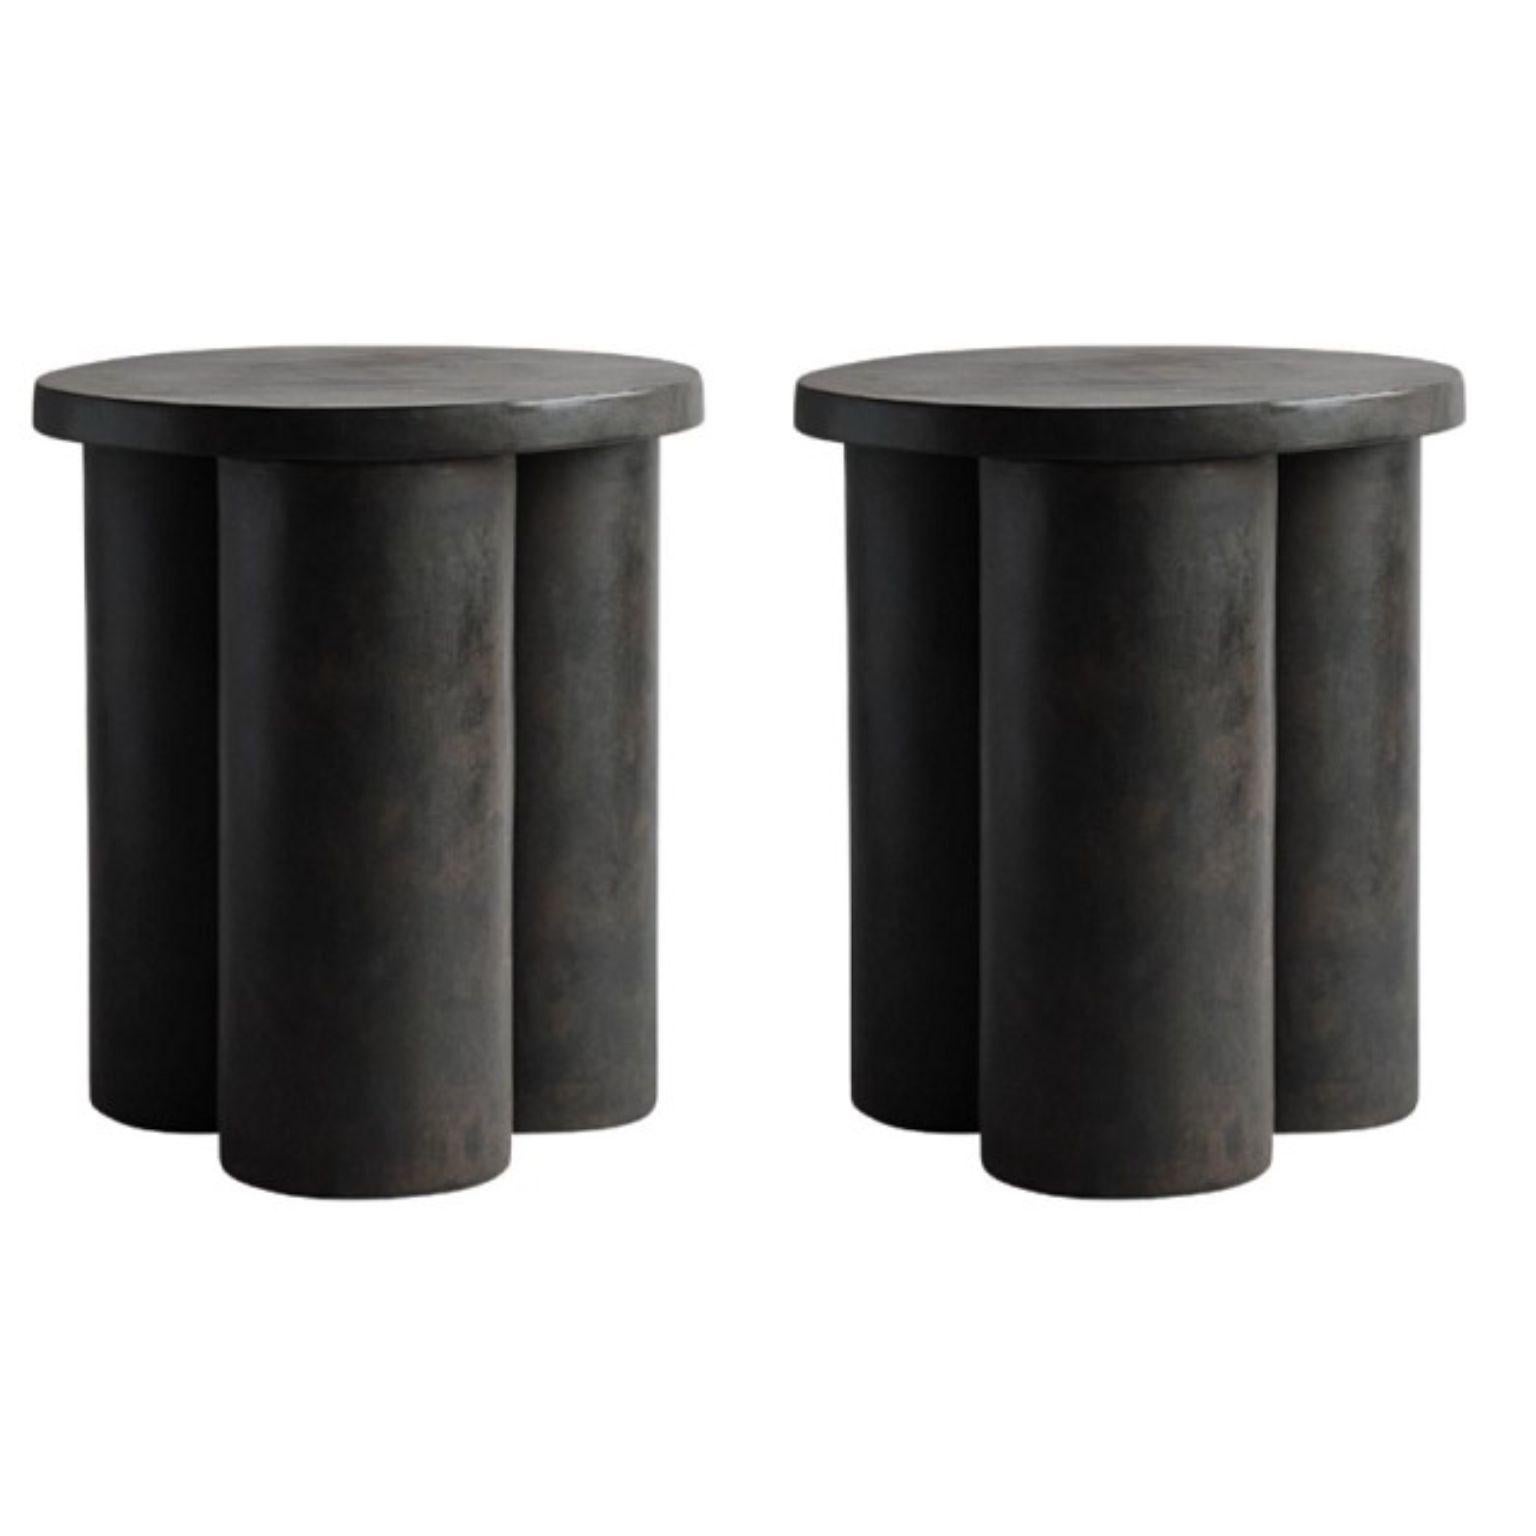 Set of 2 big foot tables tall by 101 Copenhagen
Designed by Kristian Sofus Hansen & Tommy Hyldahl
Dimensions: L 45 / W 45 /H 51 CM
Materials: fiber concrete

At first glance the Big Foots collection looks heavy and dense, yet on further